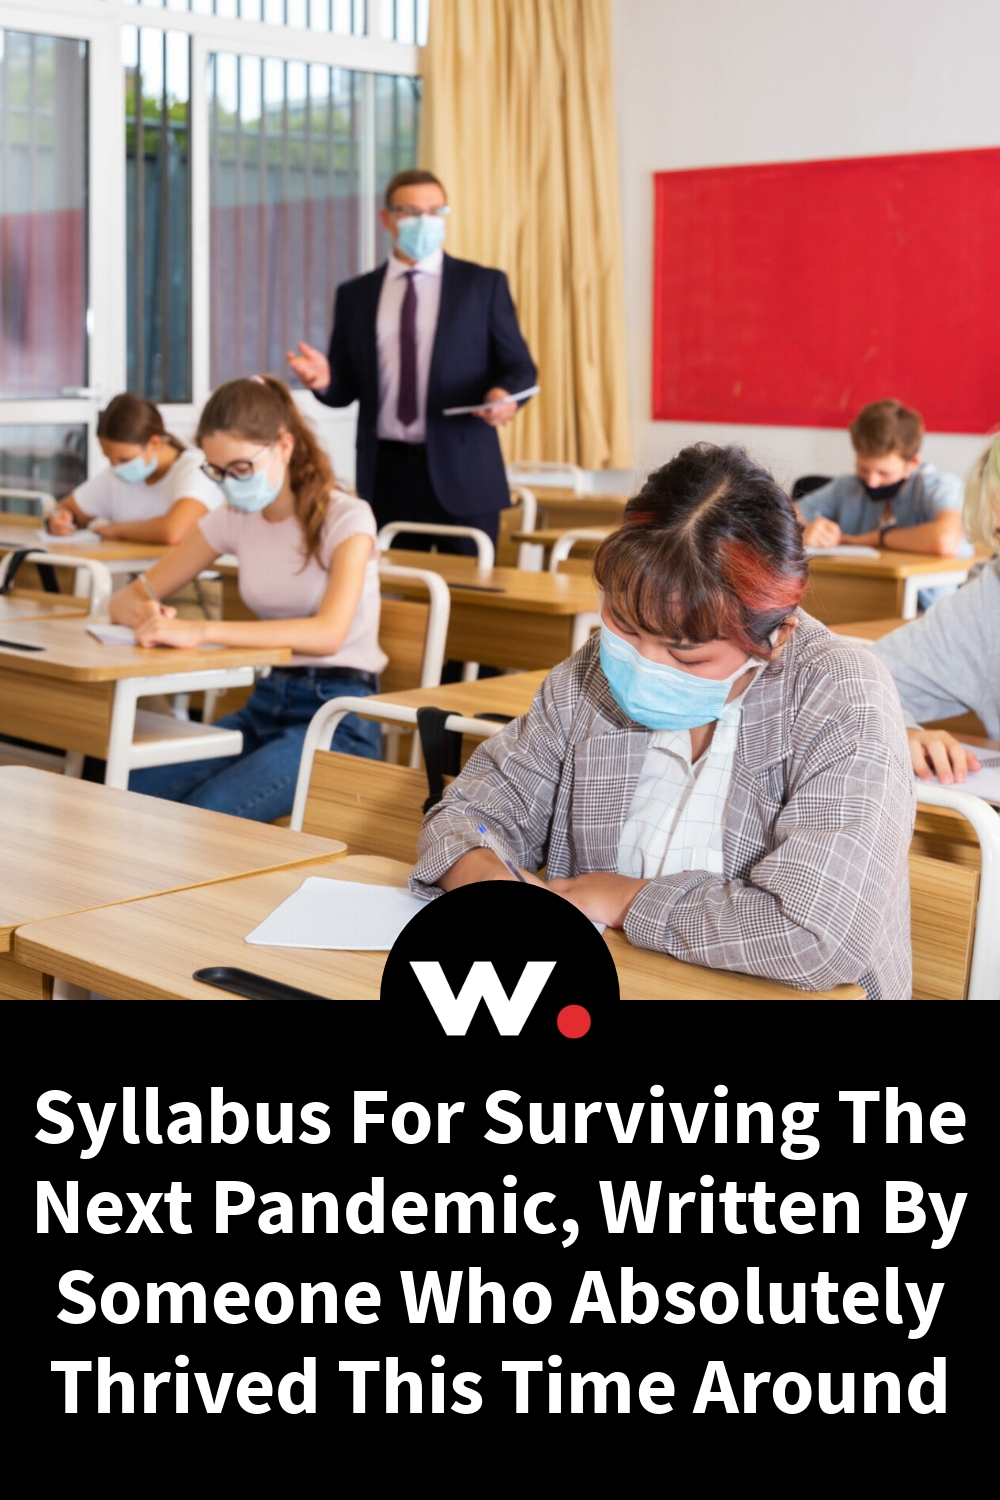 Syllabus For Surviving The Next Pandemic, Written By Someone Who Absolutely Thrived This Time Around